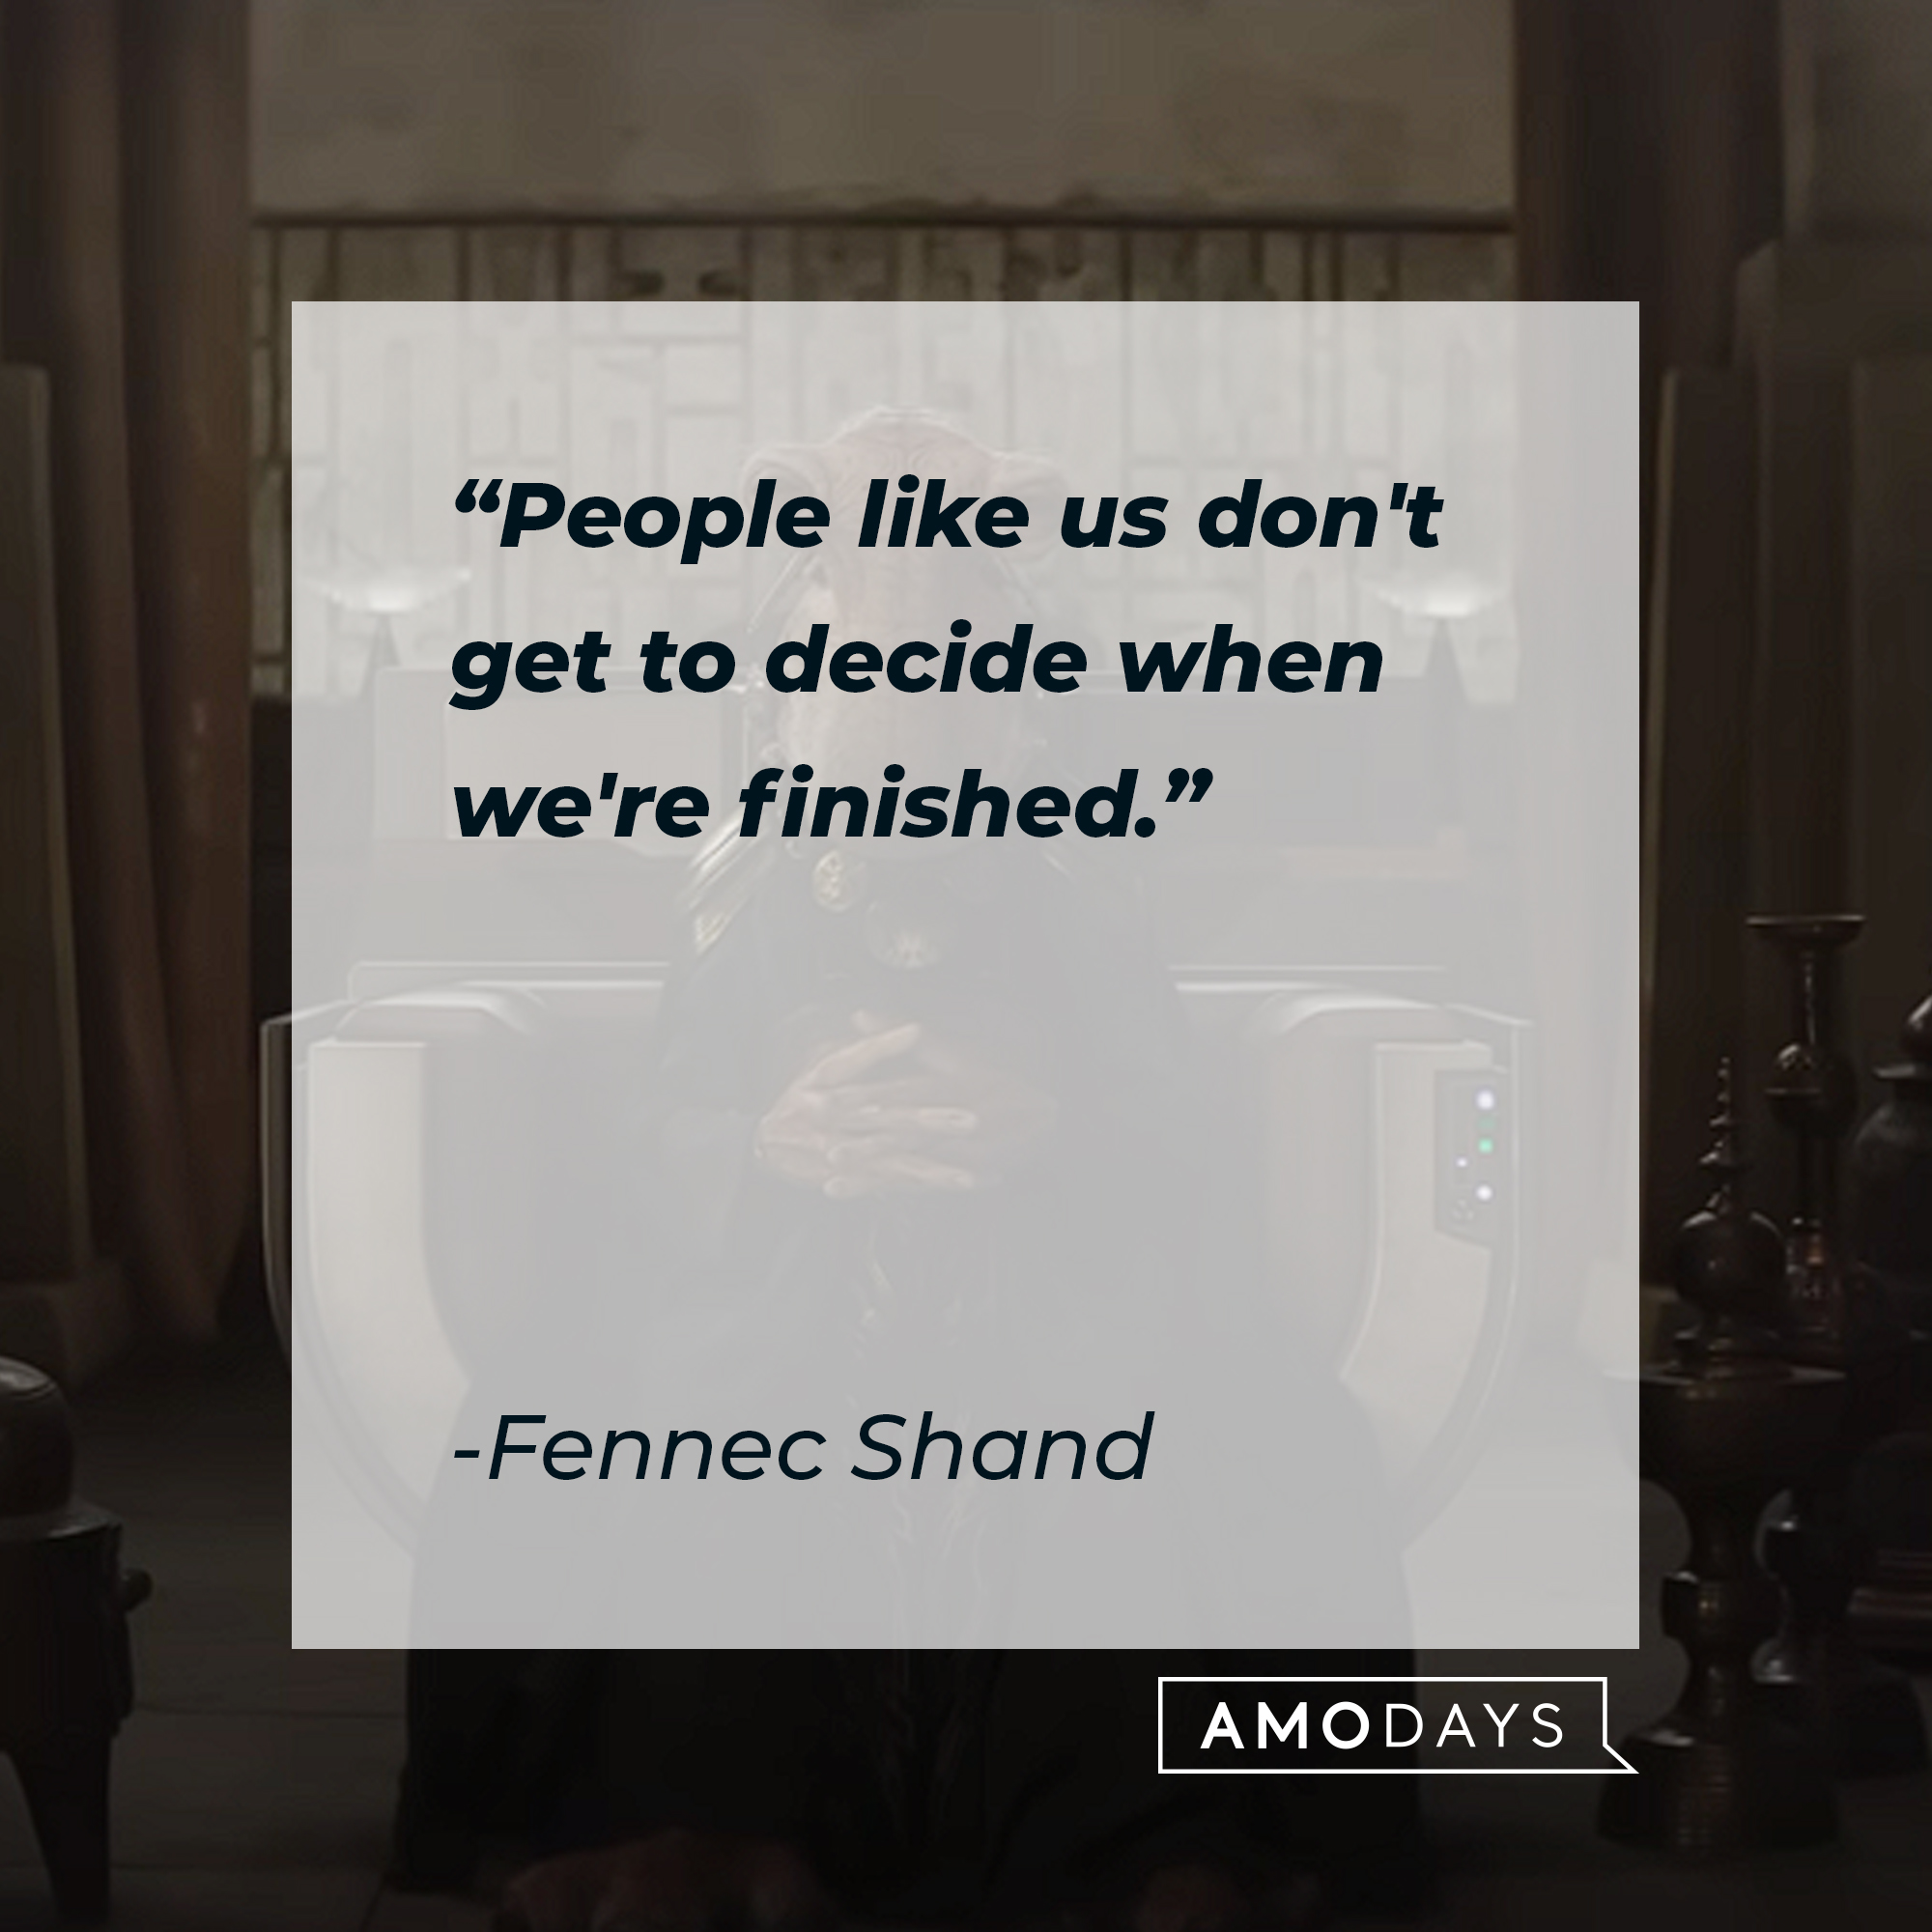 Fennec Shand's quote: "People like us don't get to decide when we're finished." | Source: youtube.com/StarWars